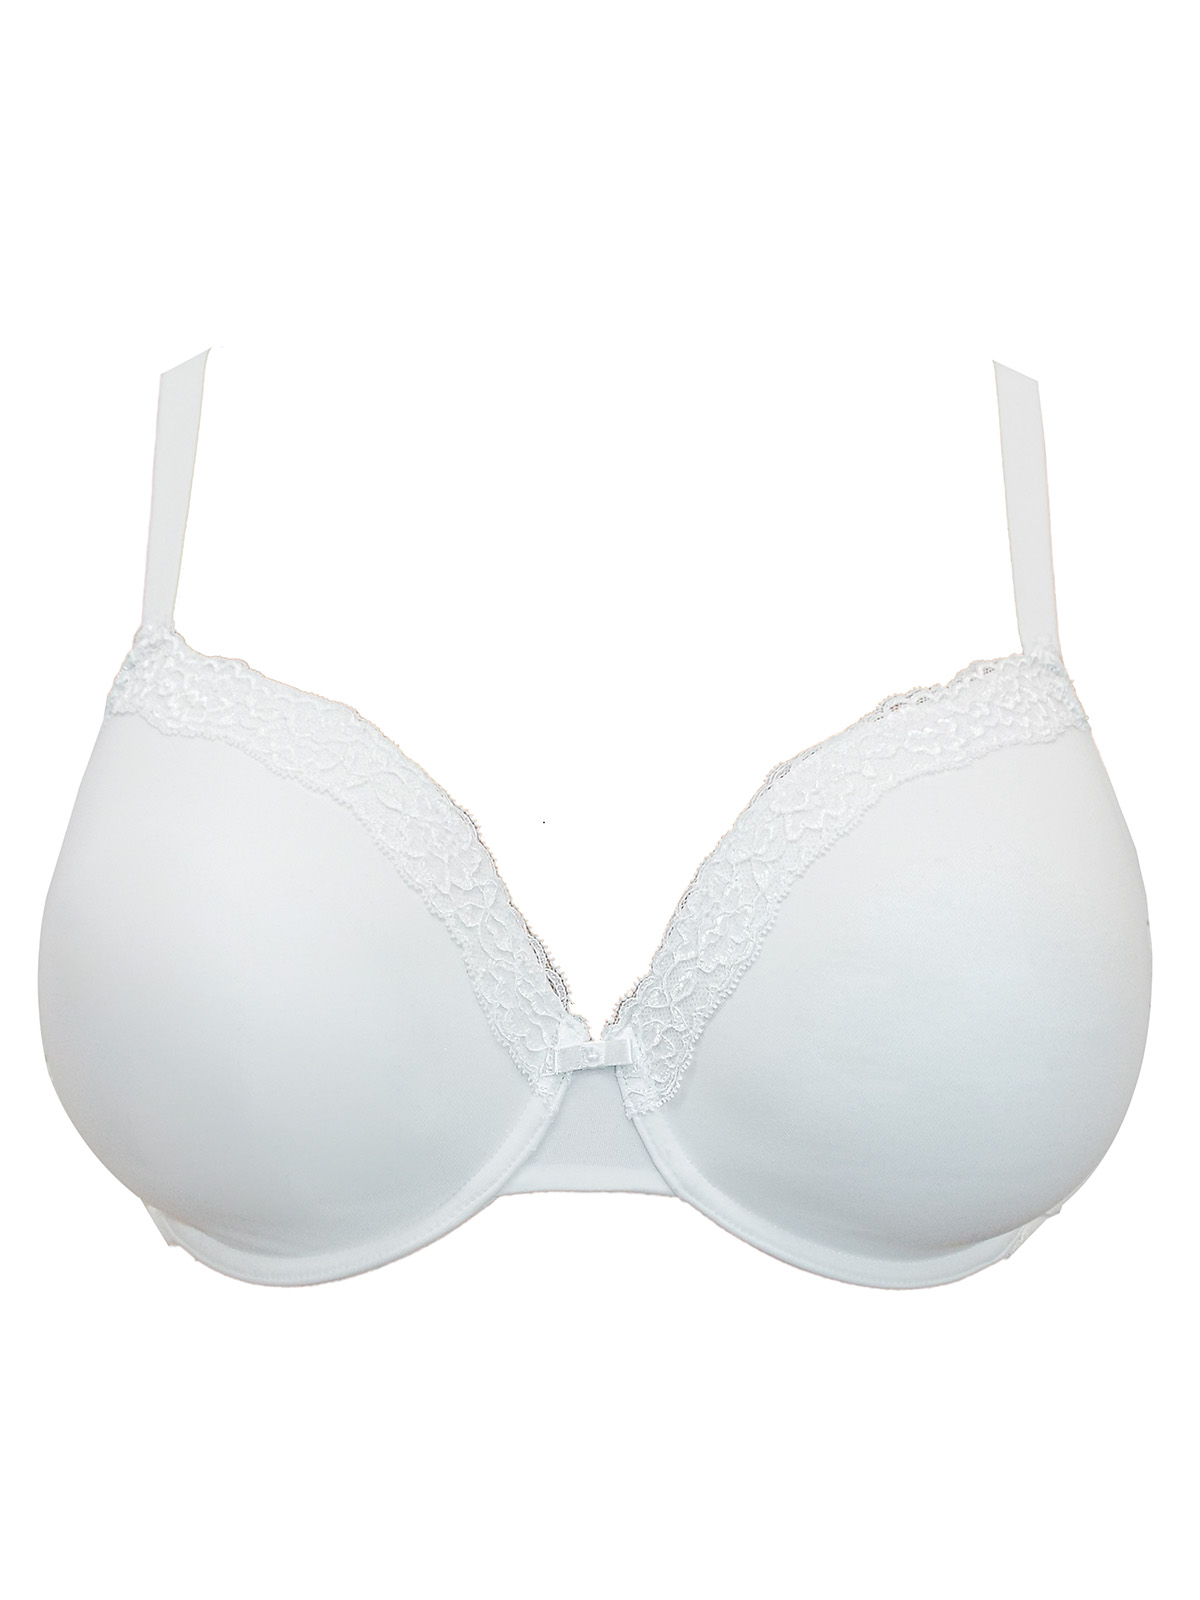 Marks and Spencer - - M&5 WHITE Padded Plunge Bra - Size 34 (DD cup)